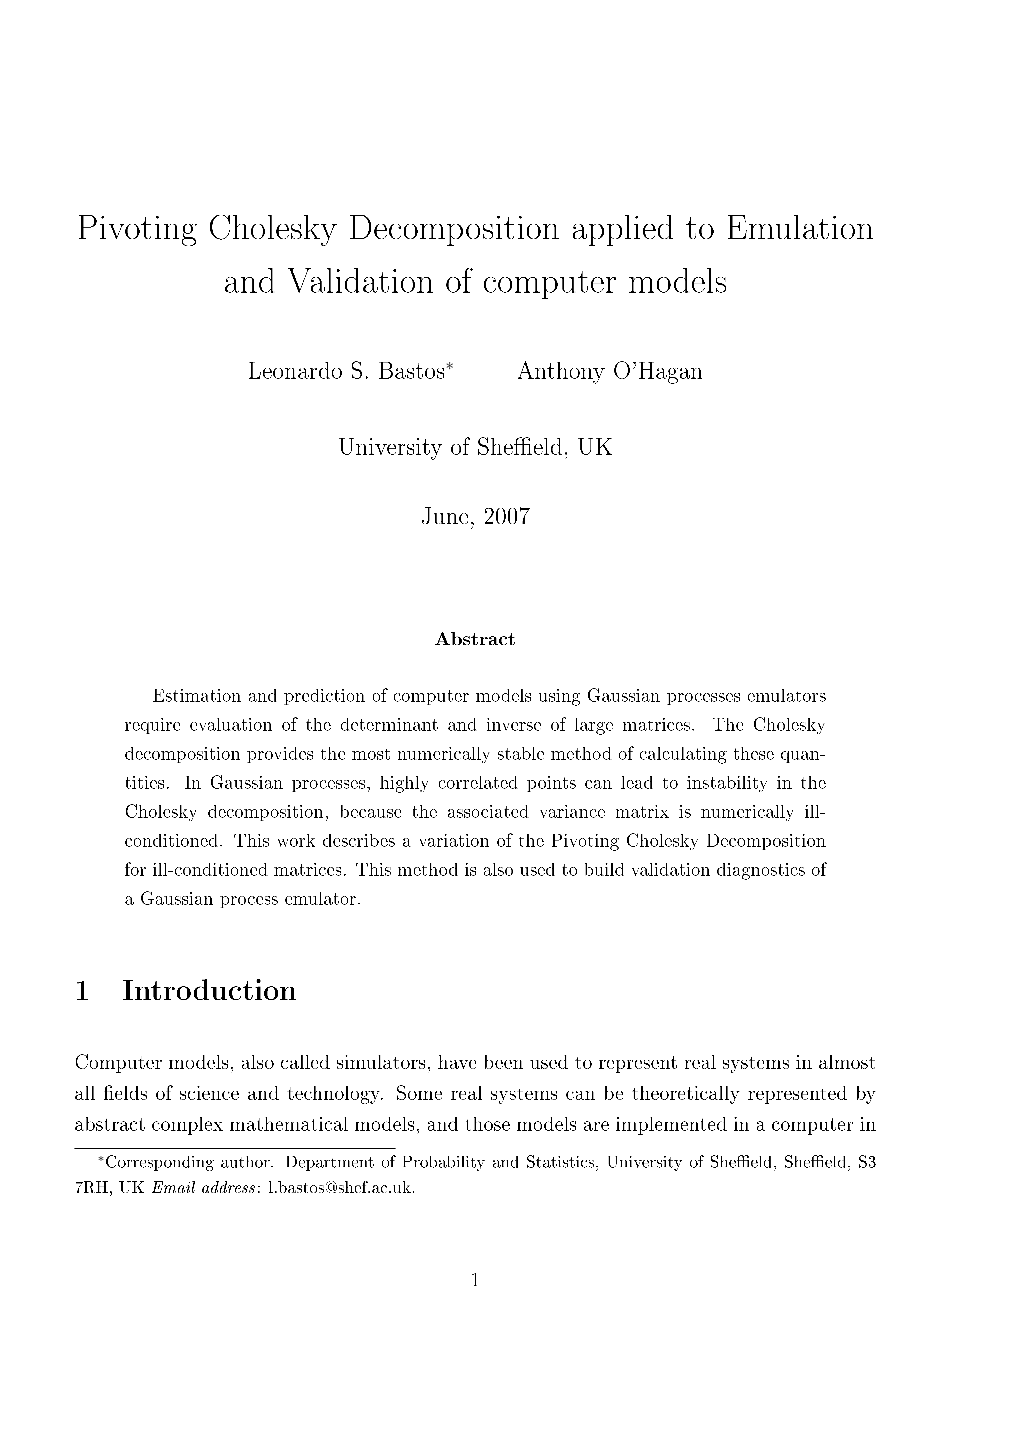 Pivoting Cholesky Decomposition Applied to Emulation and Validation of Computer Models